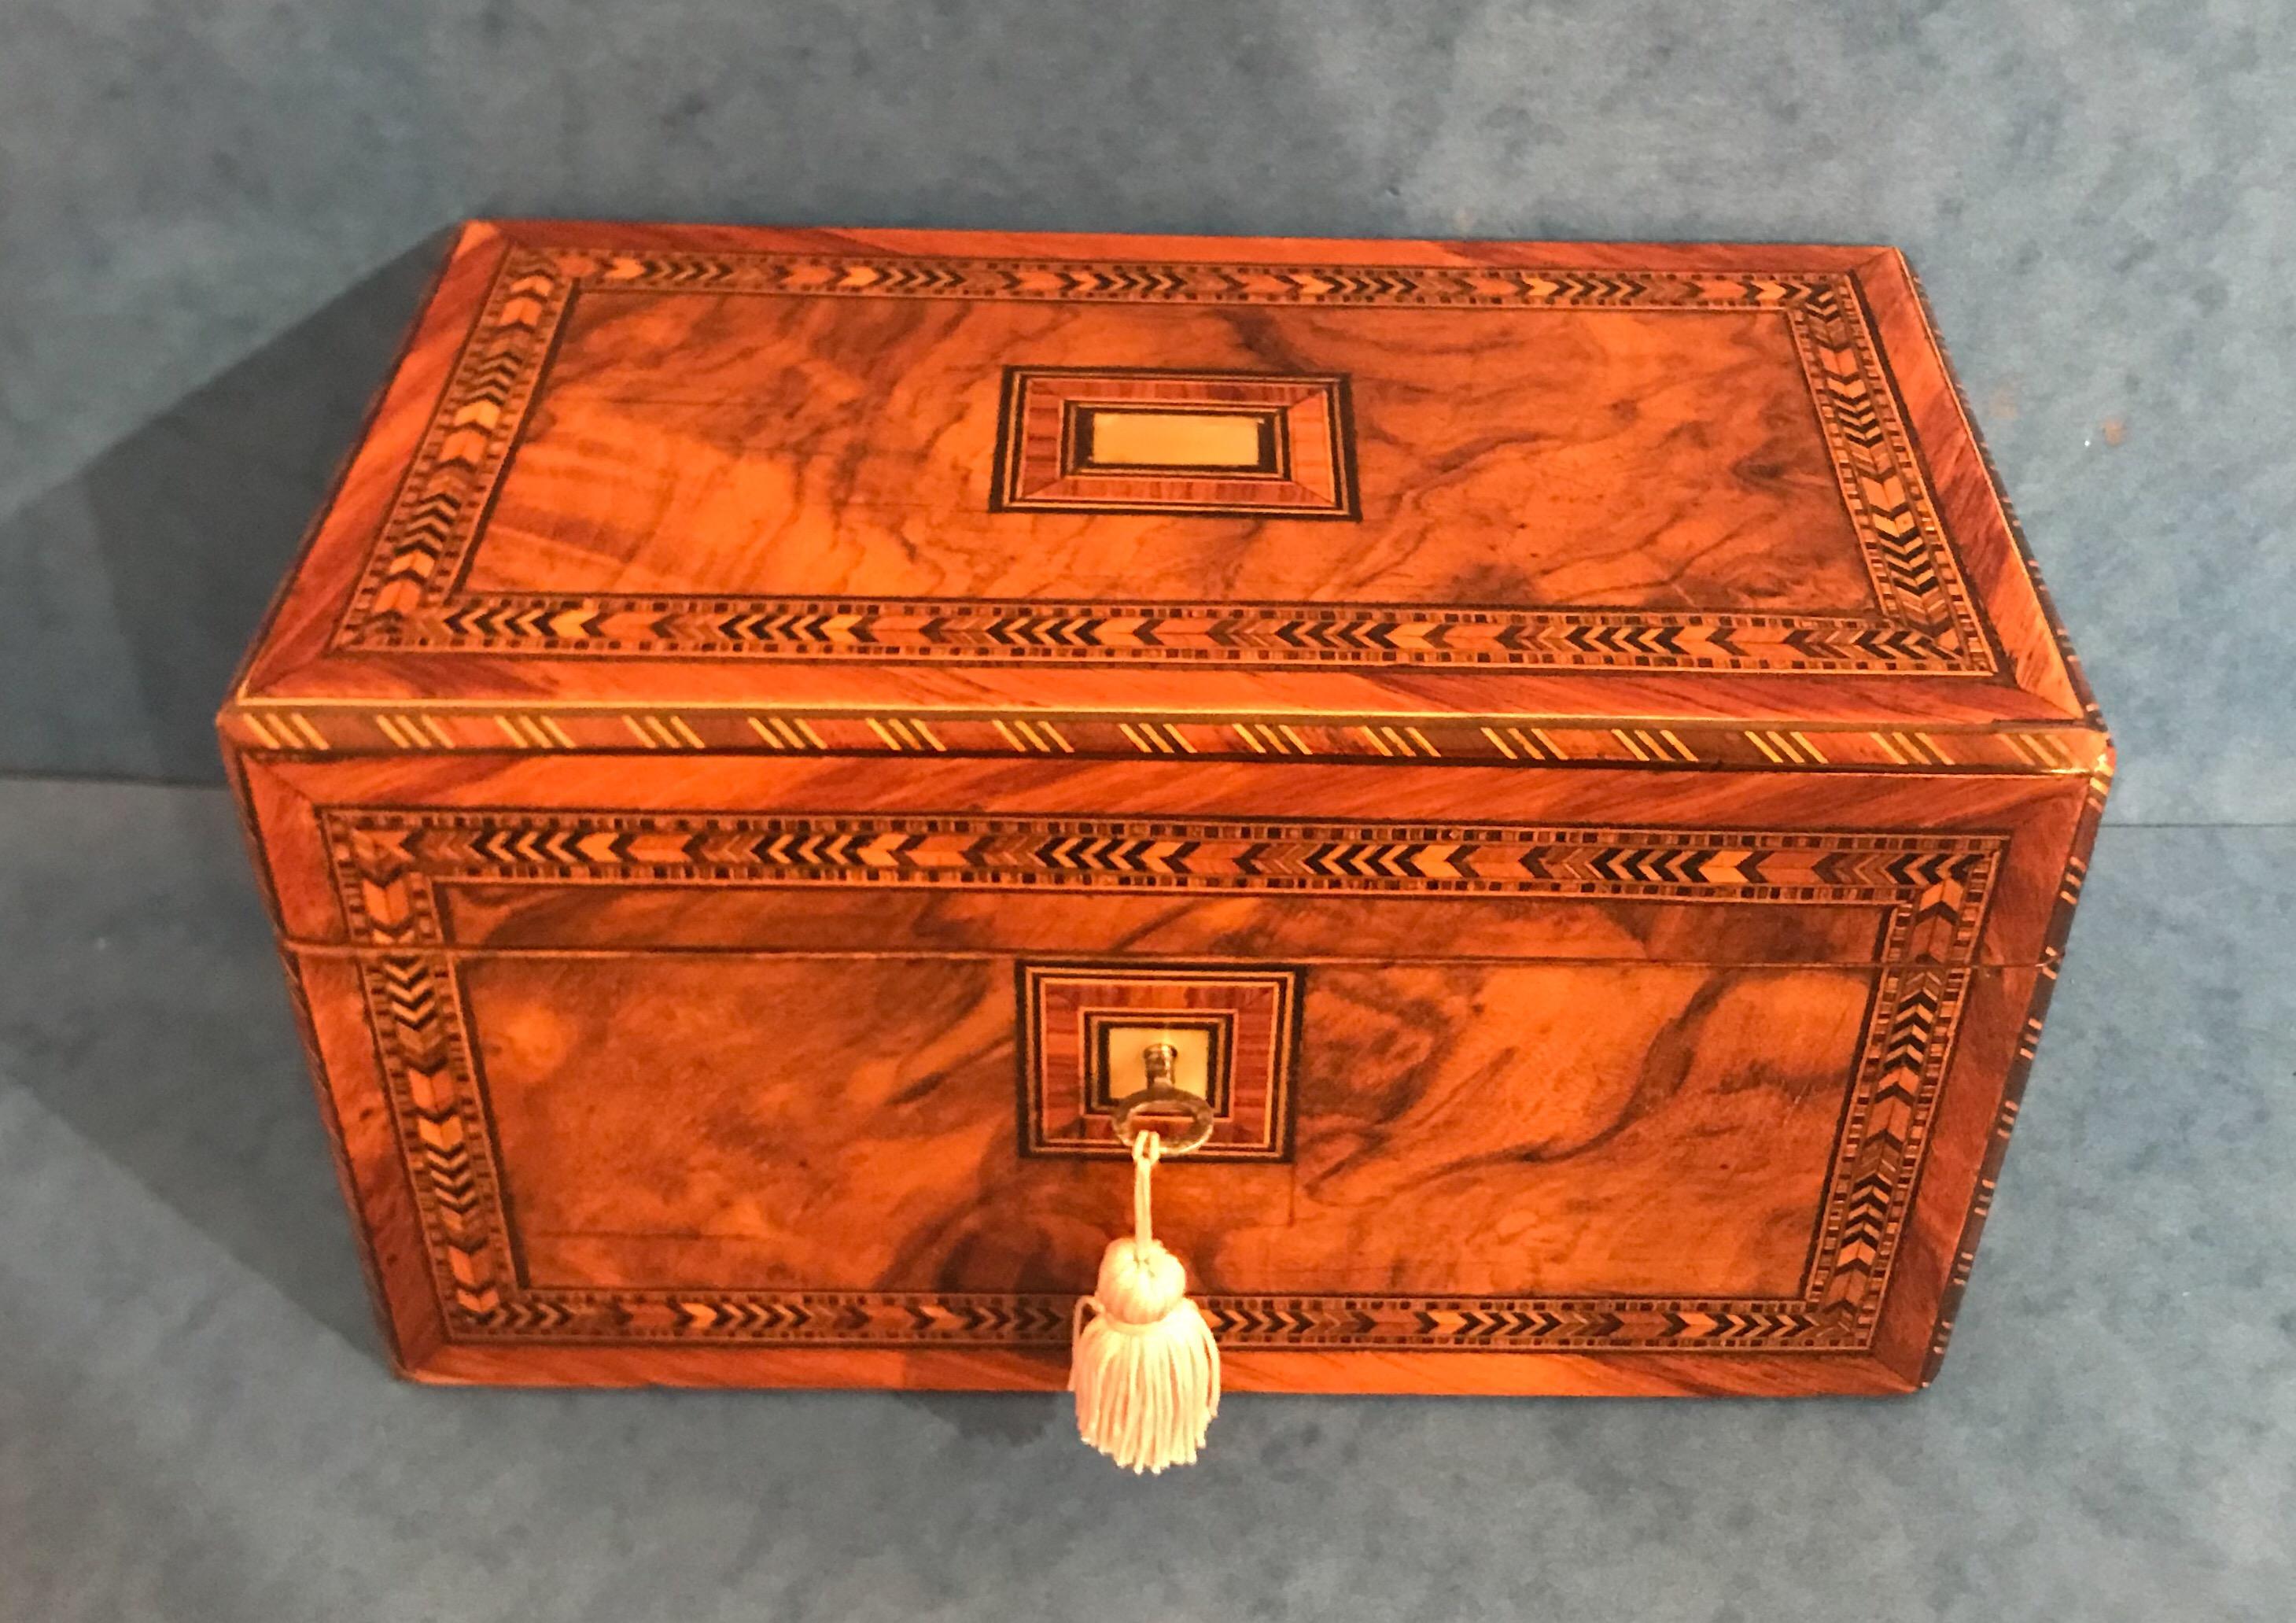 This is a Victorian 1870 walnut inlaid tulipwood Tunbridge ware twin lidded tea caddy. It has a mahogany interior and to the exterior a mother of pearl top and key escutcheon. It is in superb condition but a note of caution, it has a temperamental